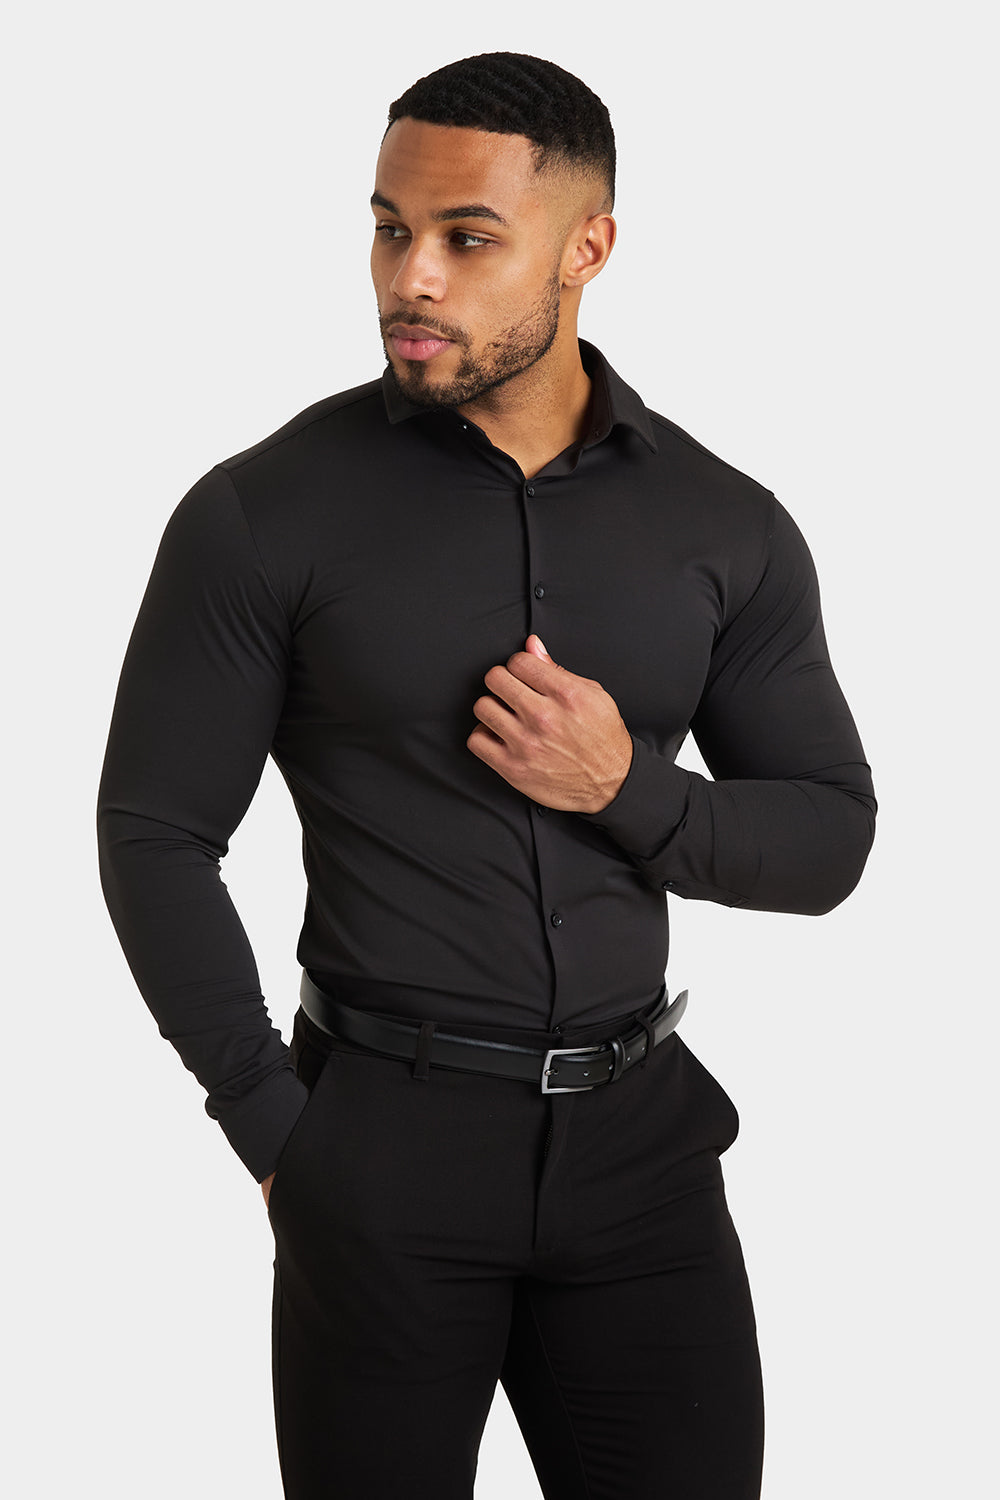 Muscle Fit Dress and Signature 2.0 Shirt 4-Pack - TAILORED ATHLETE - ROW